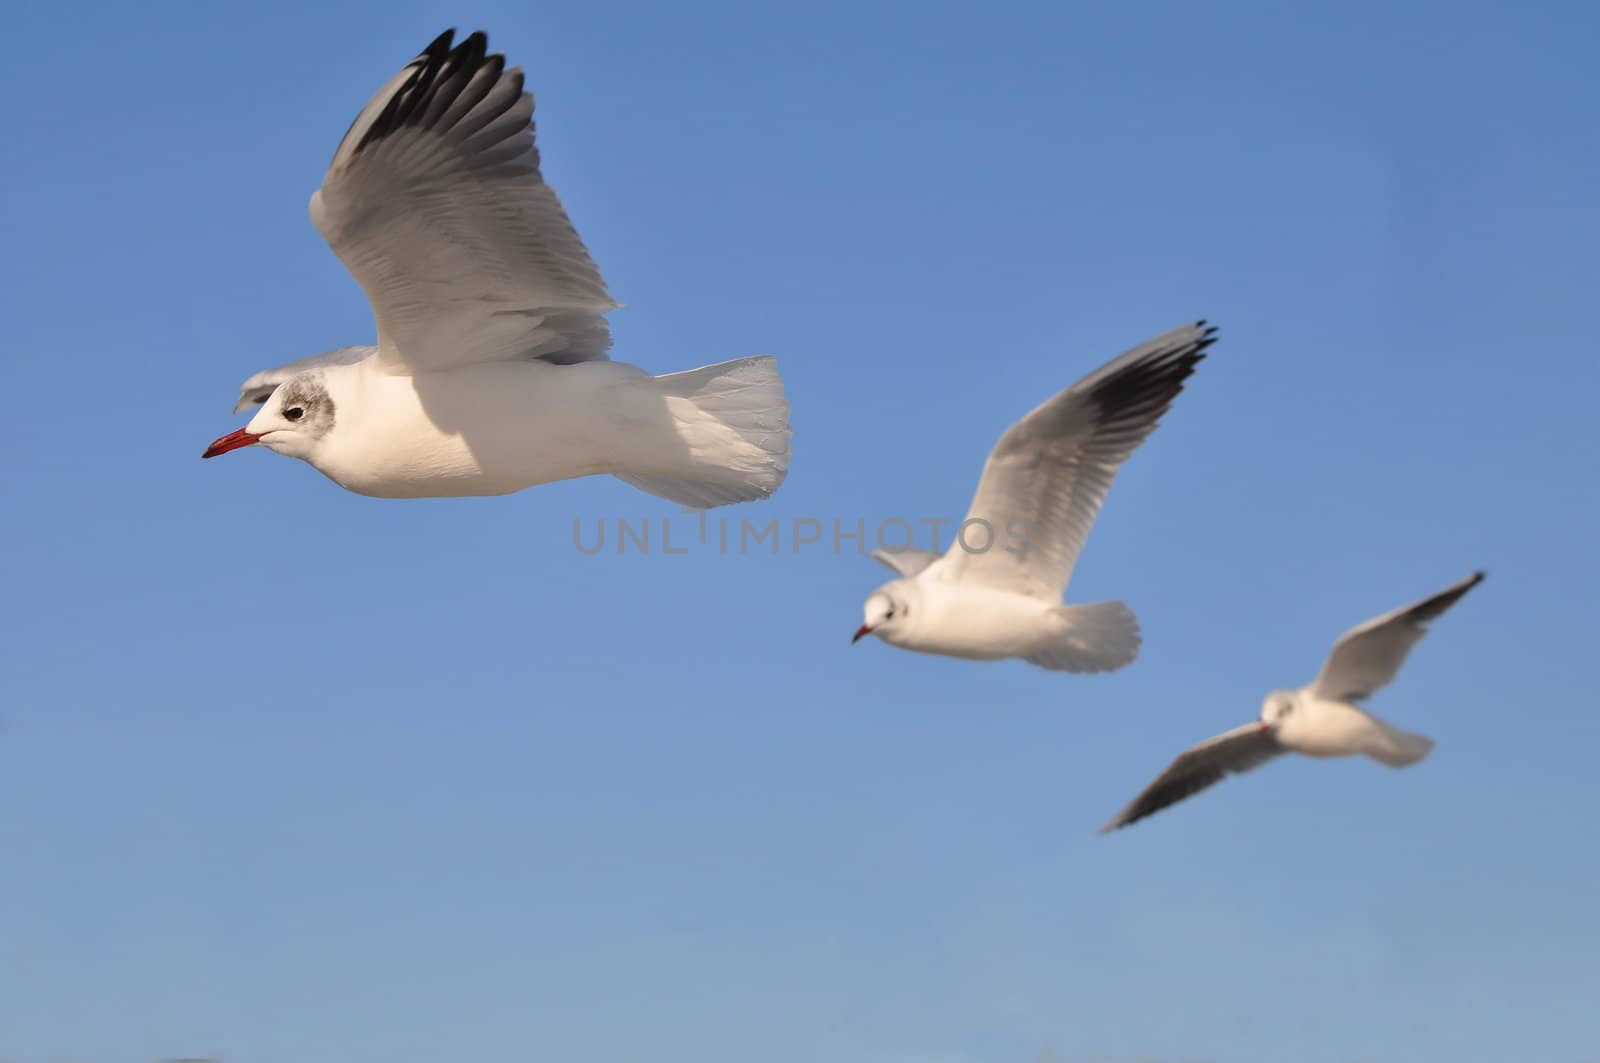 Three seagulls flying with a clear blue sky as background.